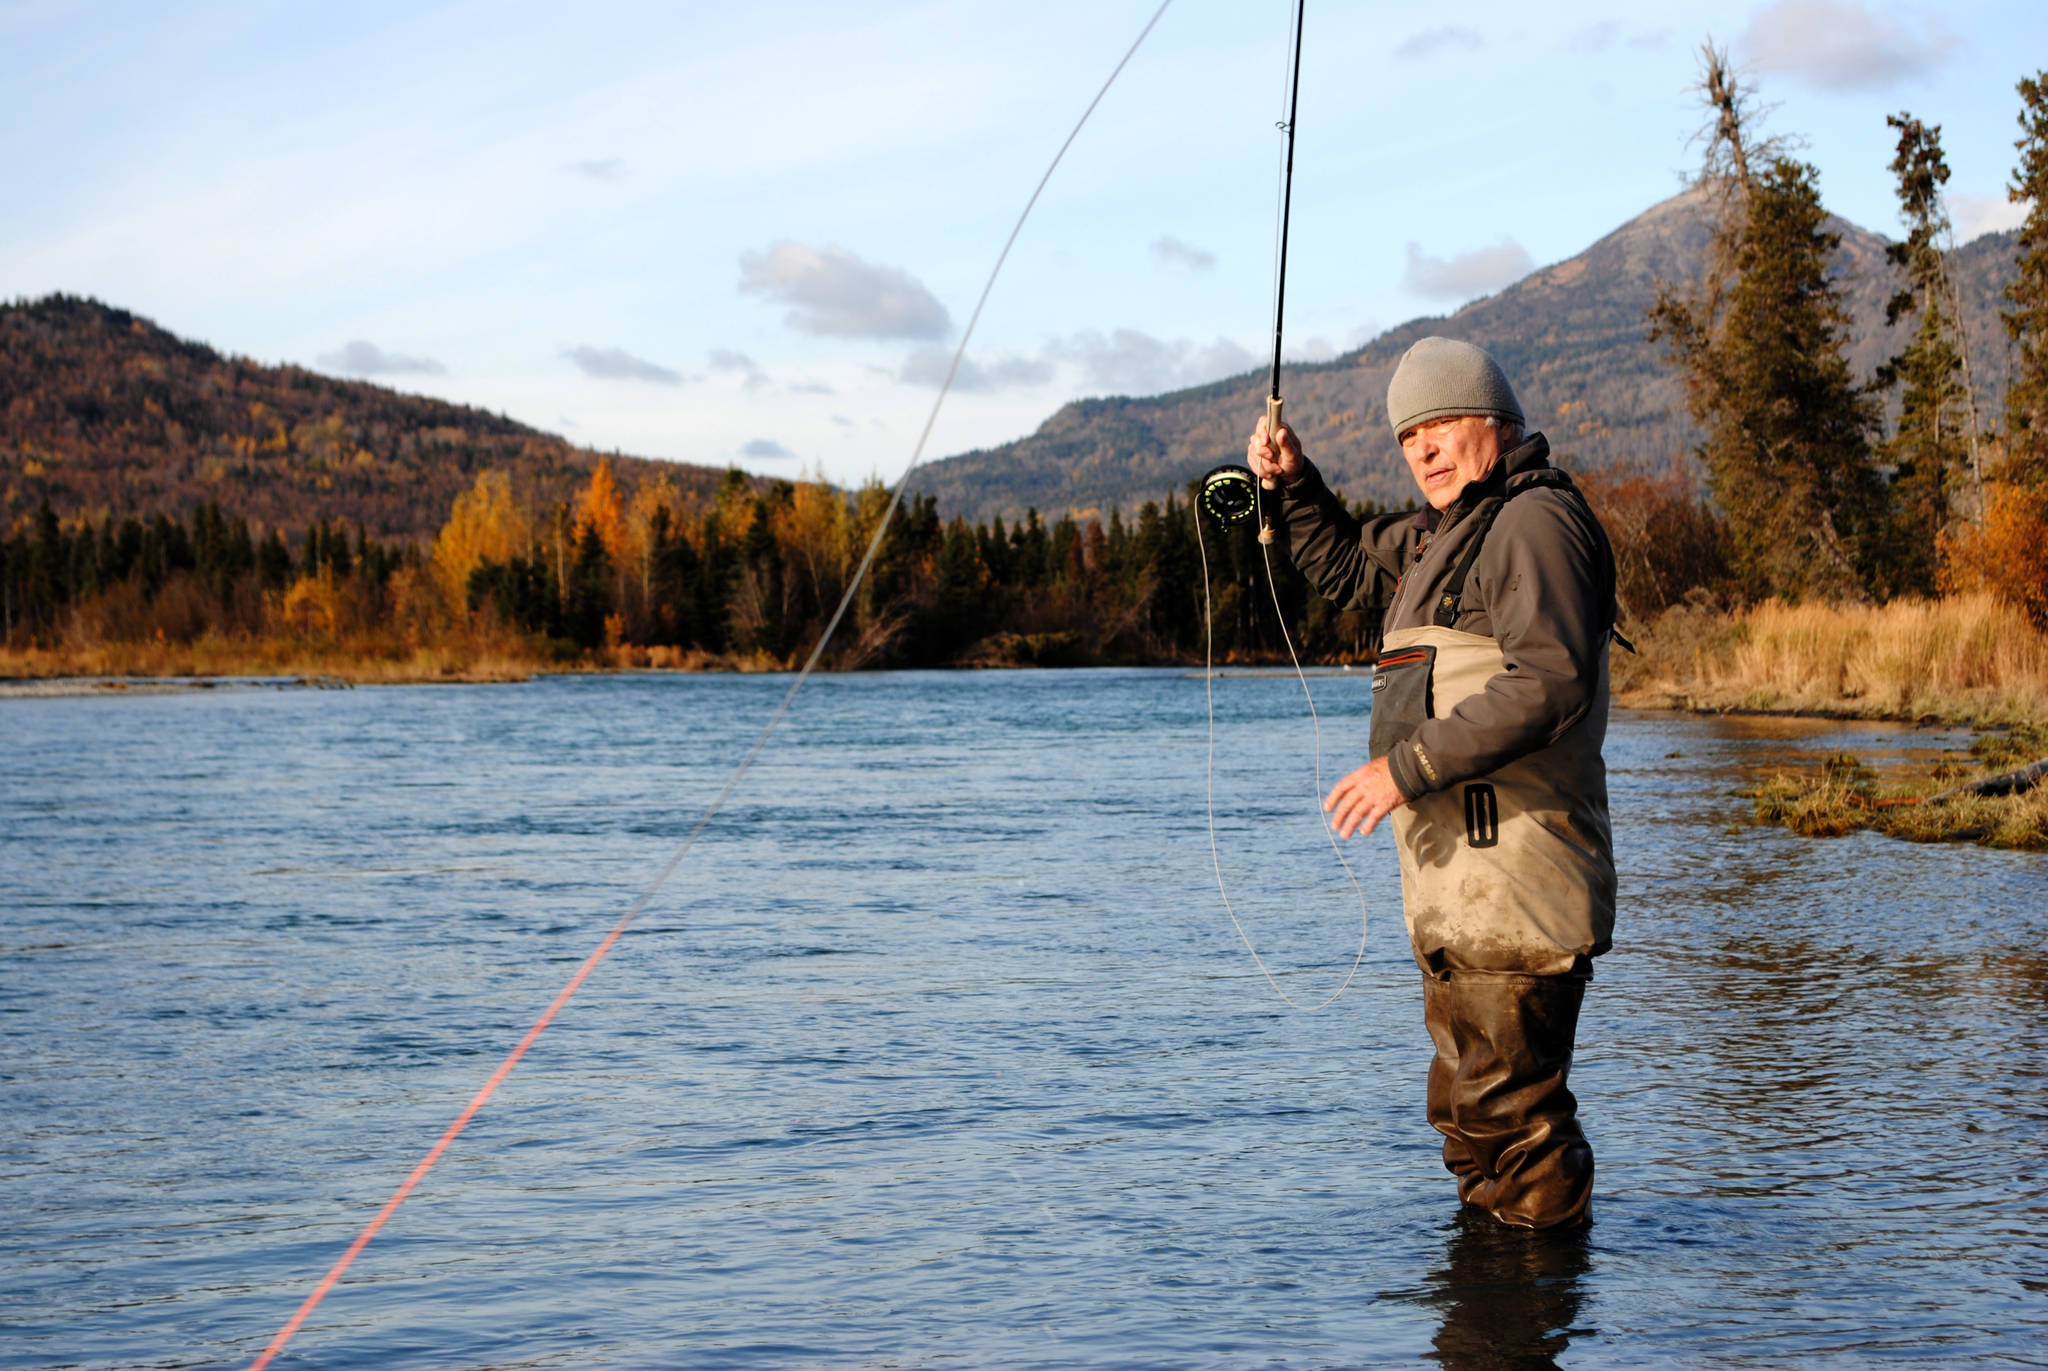 TOP: Brant Koetting, a fishing guide with Tower Rock Lodge, holds out one of his bead selections for fishing the Upper River Kenai in Alaska on Oct. 11, 2017. (Photo by Kat Sorensen/Peninsula Clarion)  ABOVE: Mike Tuhy, owner and operator of the Tower Rock Lodge in Kenai casts for trout in the Upper River Kenai on Oct. 11. (Photo by Kat Sorensen/Peninsula Clarion) BELOW: Novice fly angler and writer of this story holds out a rainbow trout she managed to catch on her first fly fishing trip with Michael Tuhy and Brant Koetting of Tower Rock Lodge in the Upper River Kenai in Alaska on Oct. 11. (Photo by Brant Koetting)